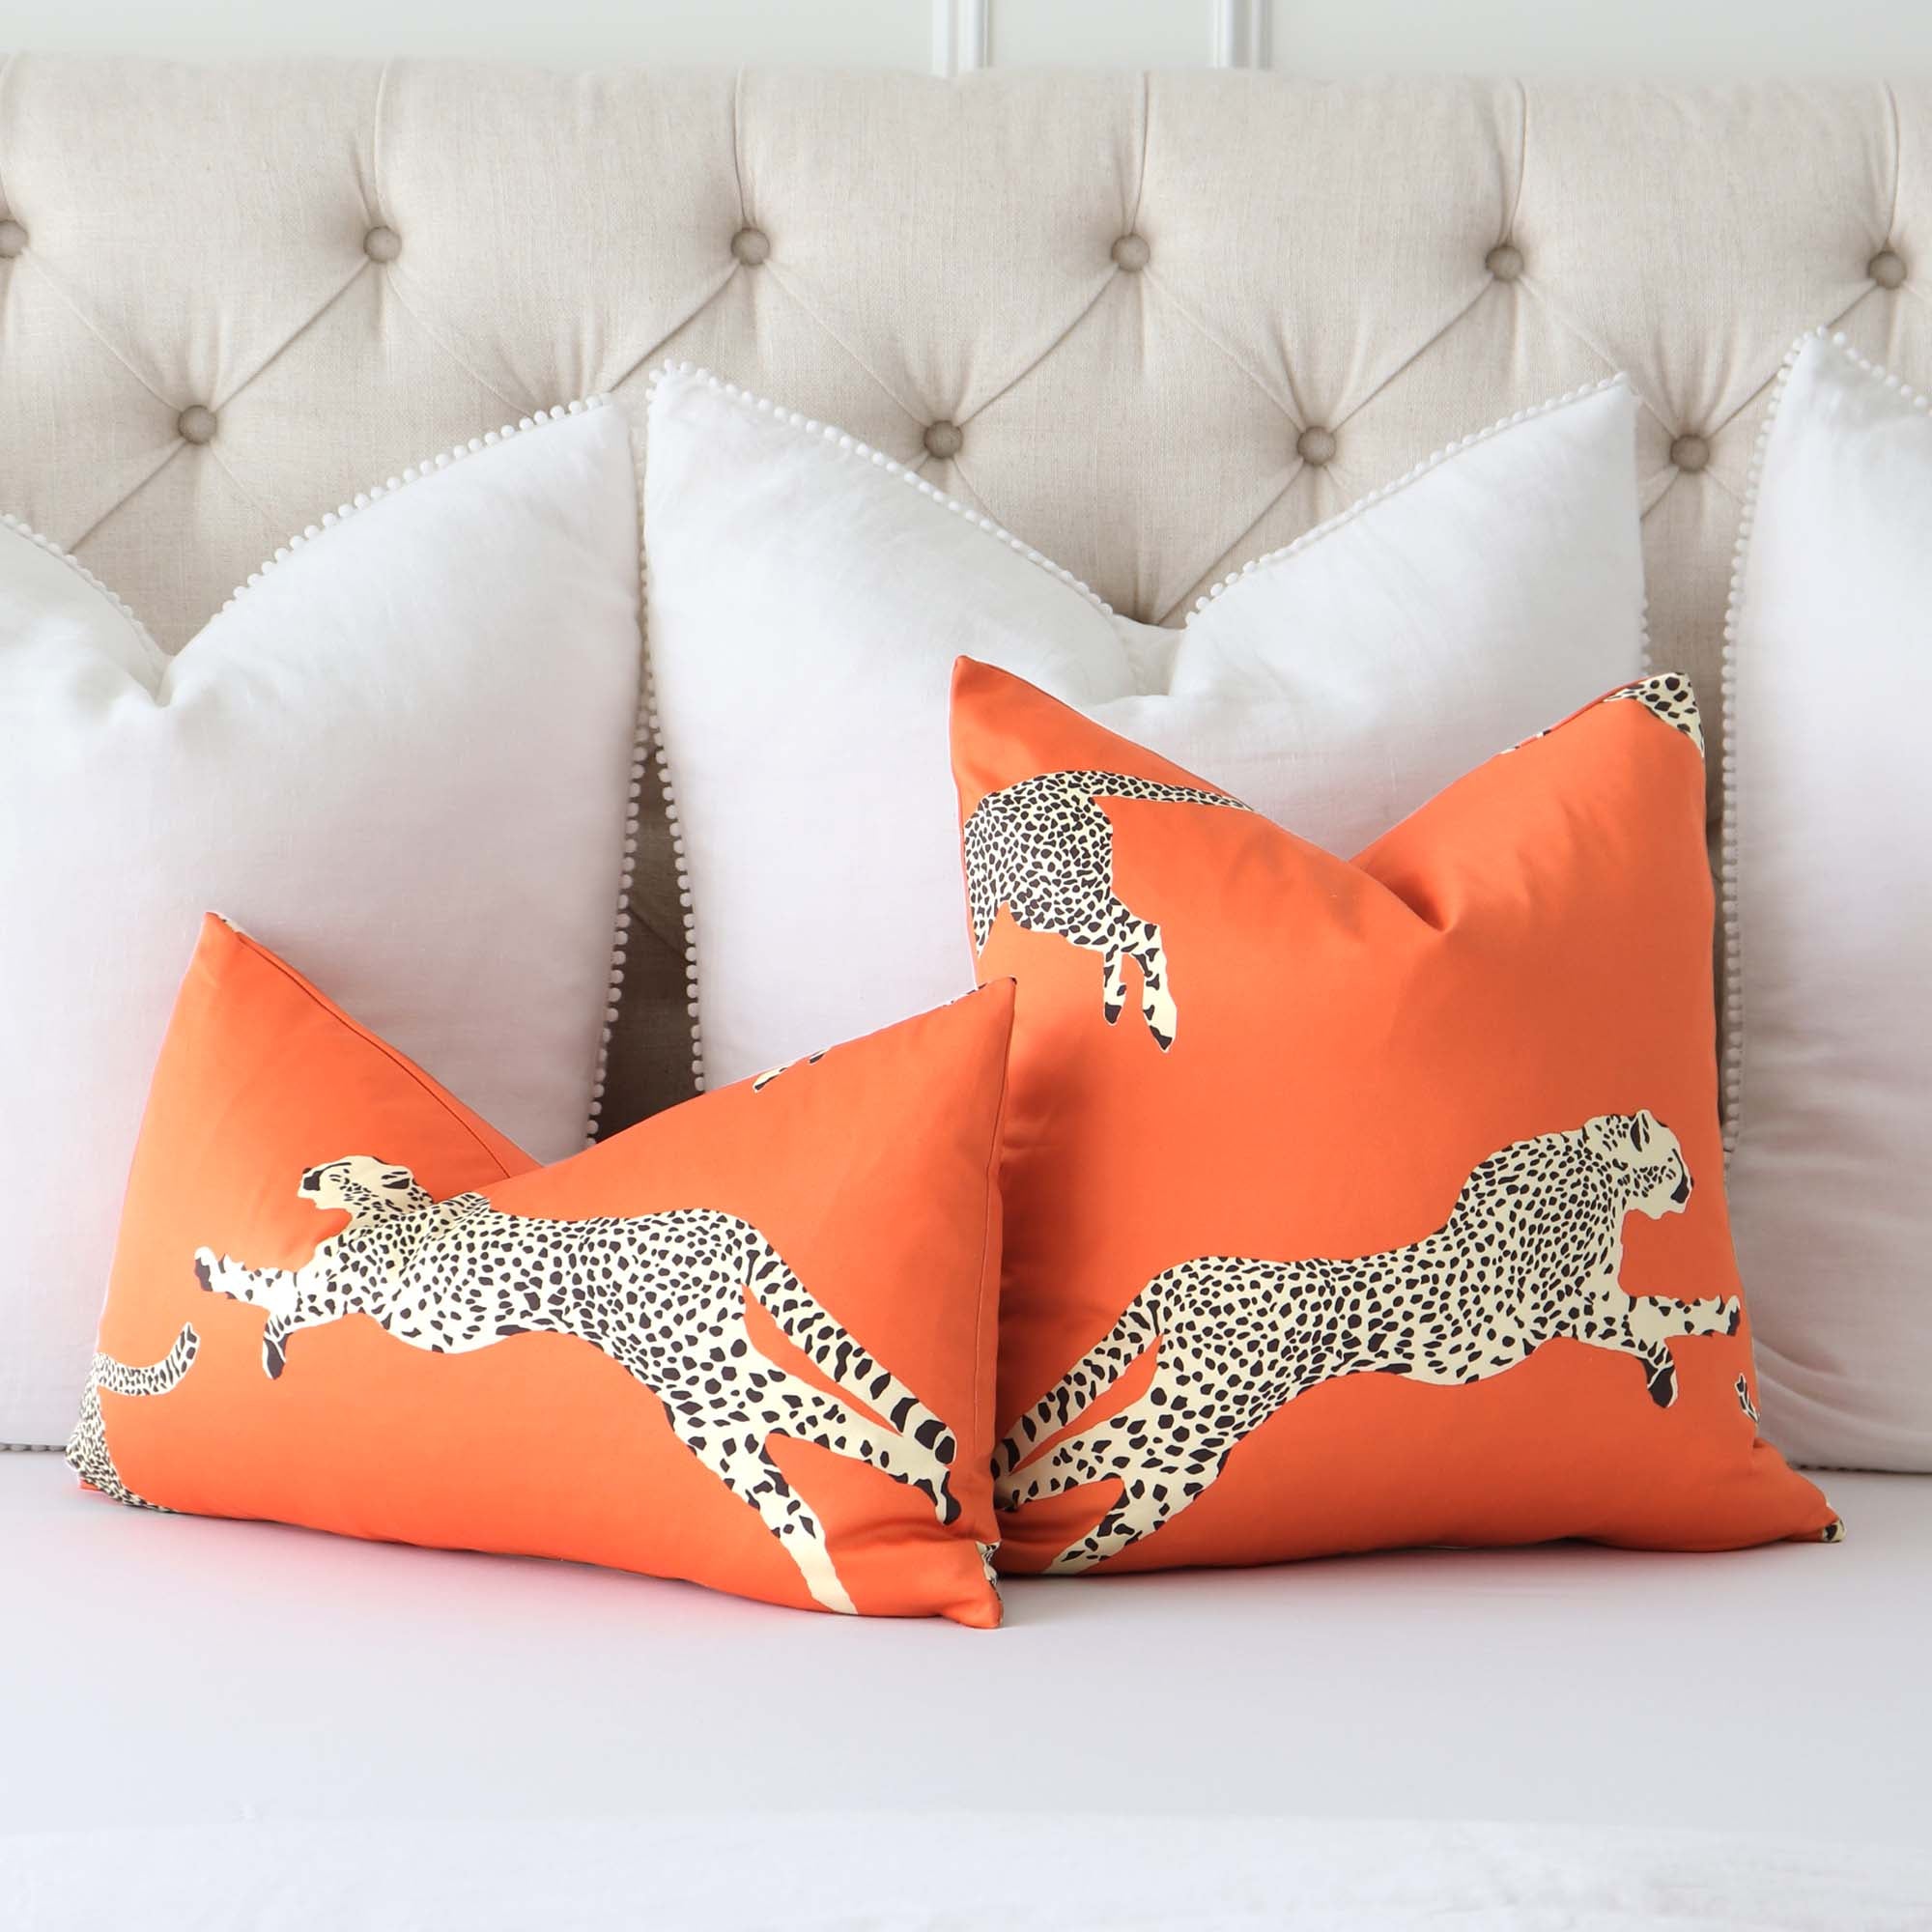 Scalamandre Leaping Cheetah Clementine Orange Luxury Throw Pillow Cover with Oversized White Euro Shams on Bed